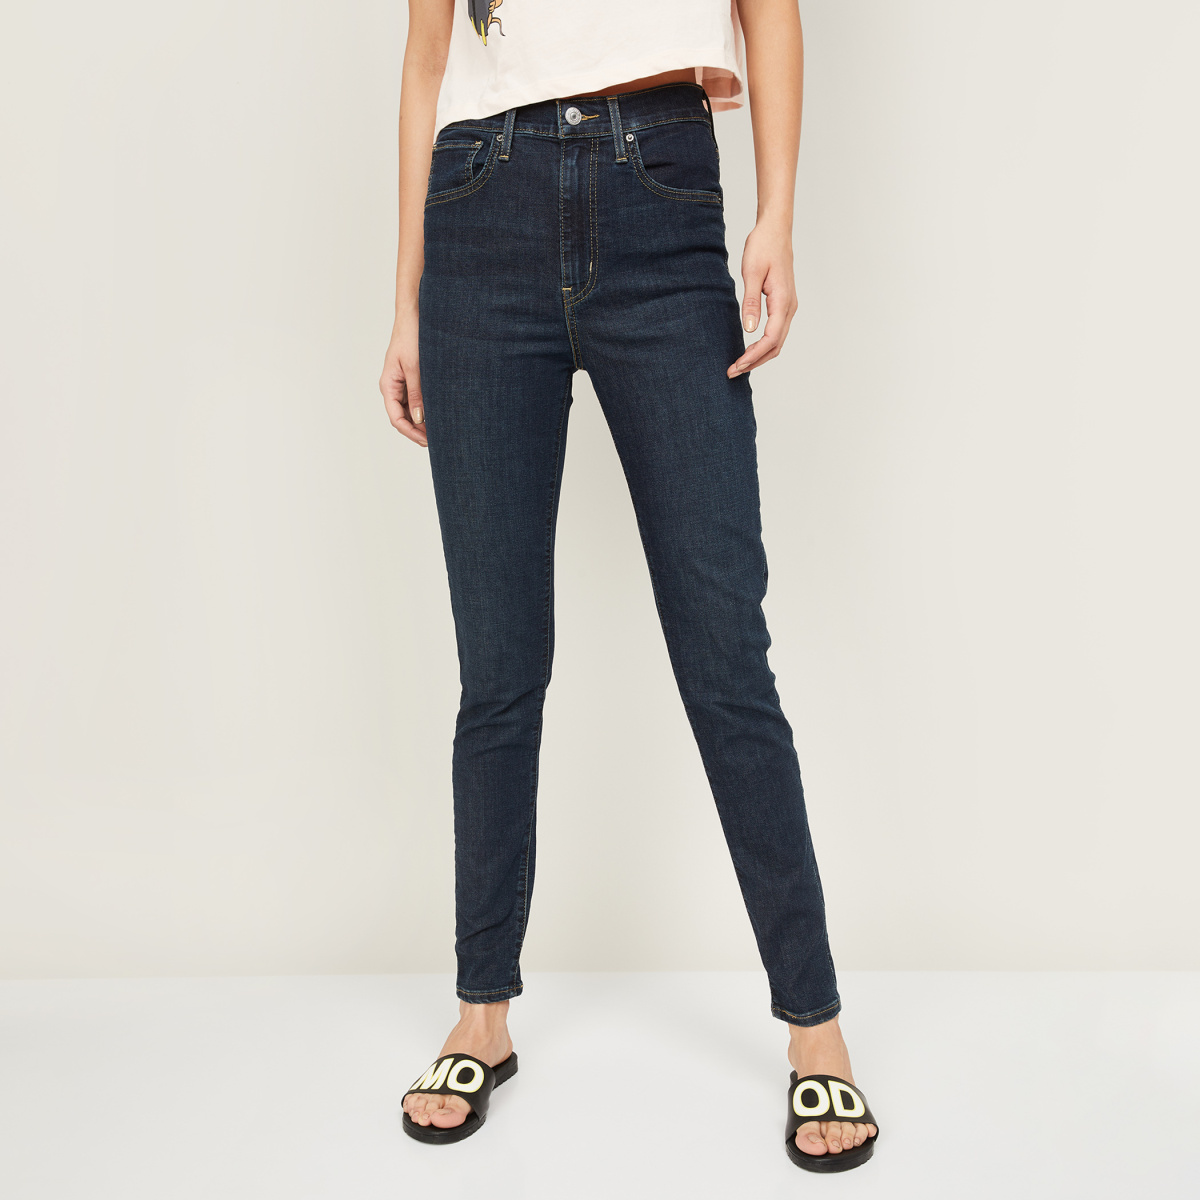 LEVI'S Women Medium Washed Skinny Fit Jeans